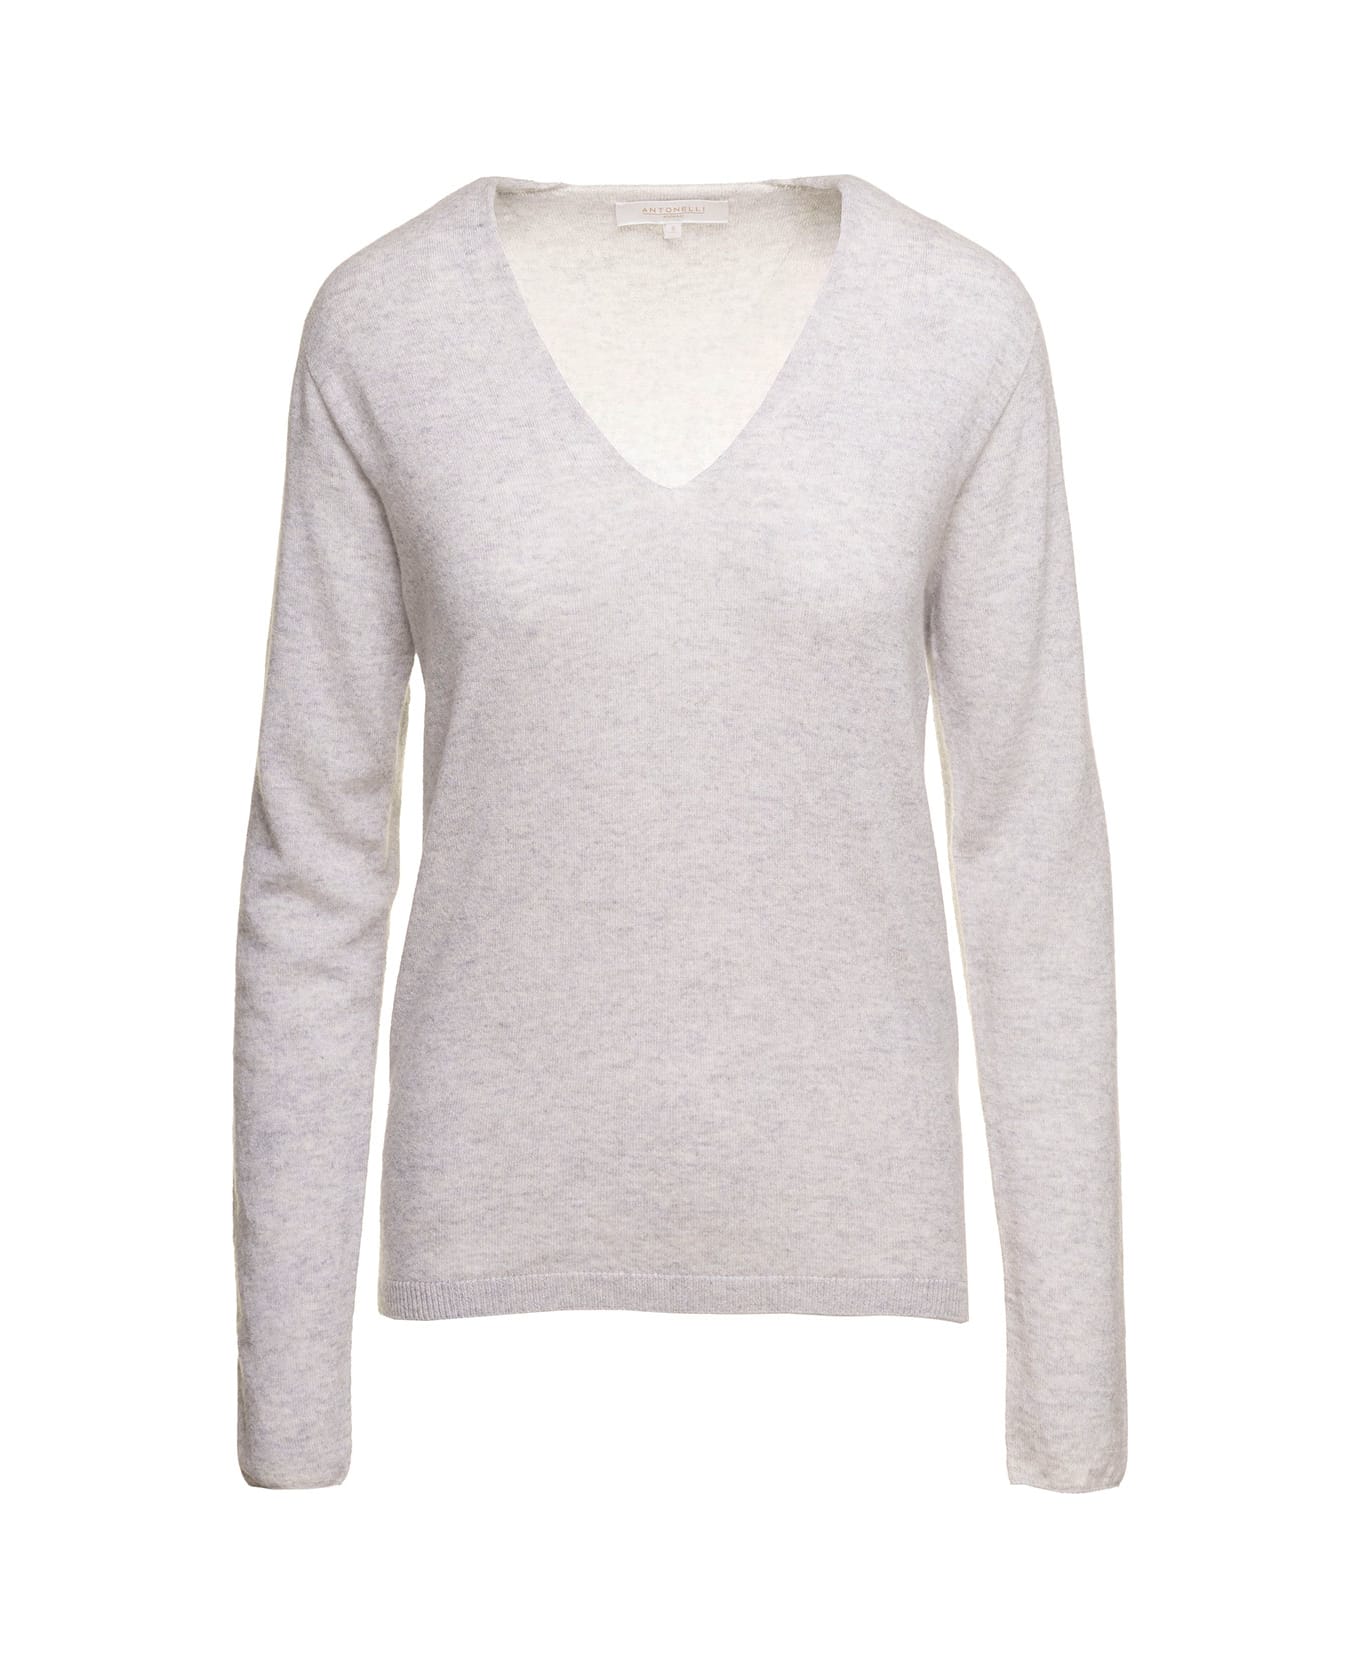 Antonelli Grey Sweater With V Neckline In Wool And Cashmere Woman - Grey